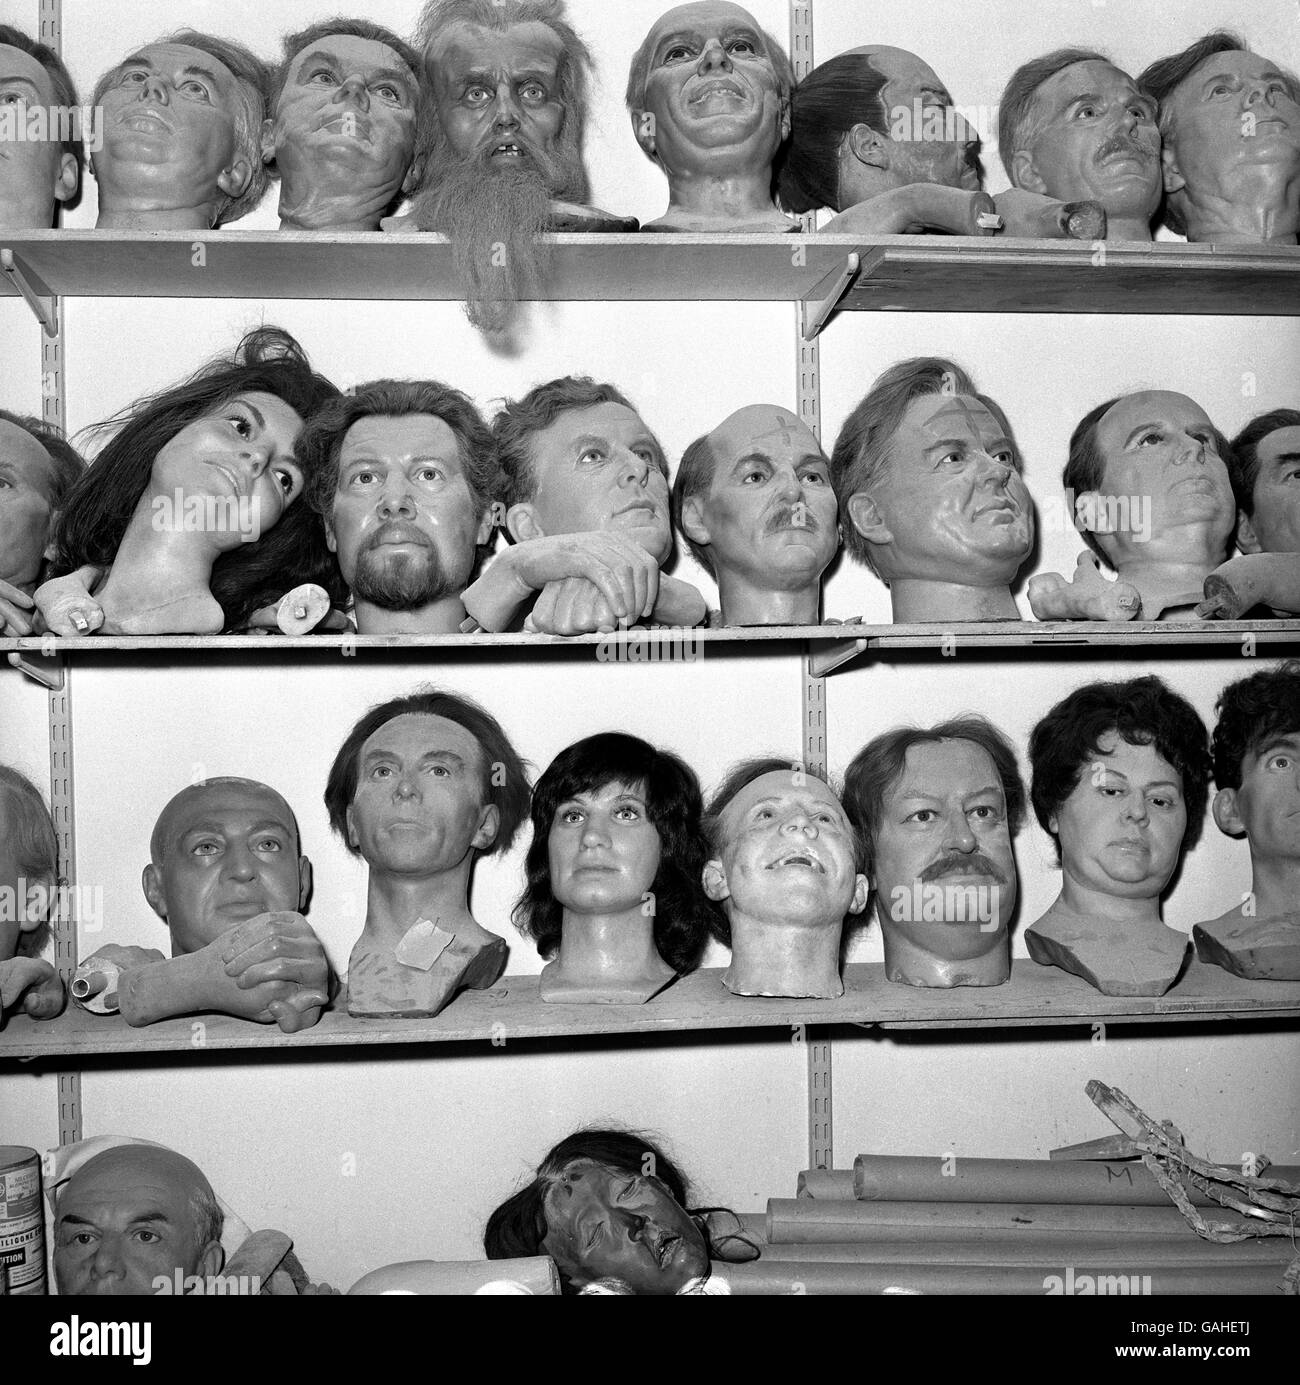 The wax head of Manchester United's George Best (bottom row, third l) is back on the shelf, joining his former teammate Nobby Stiles (bottom row, third r) amongst other notables, after his effigy was removed from the exhibition Stock Photo